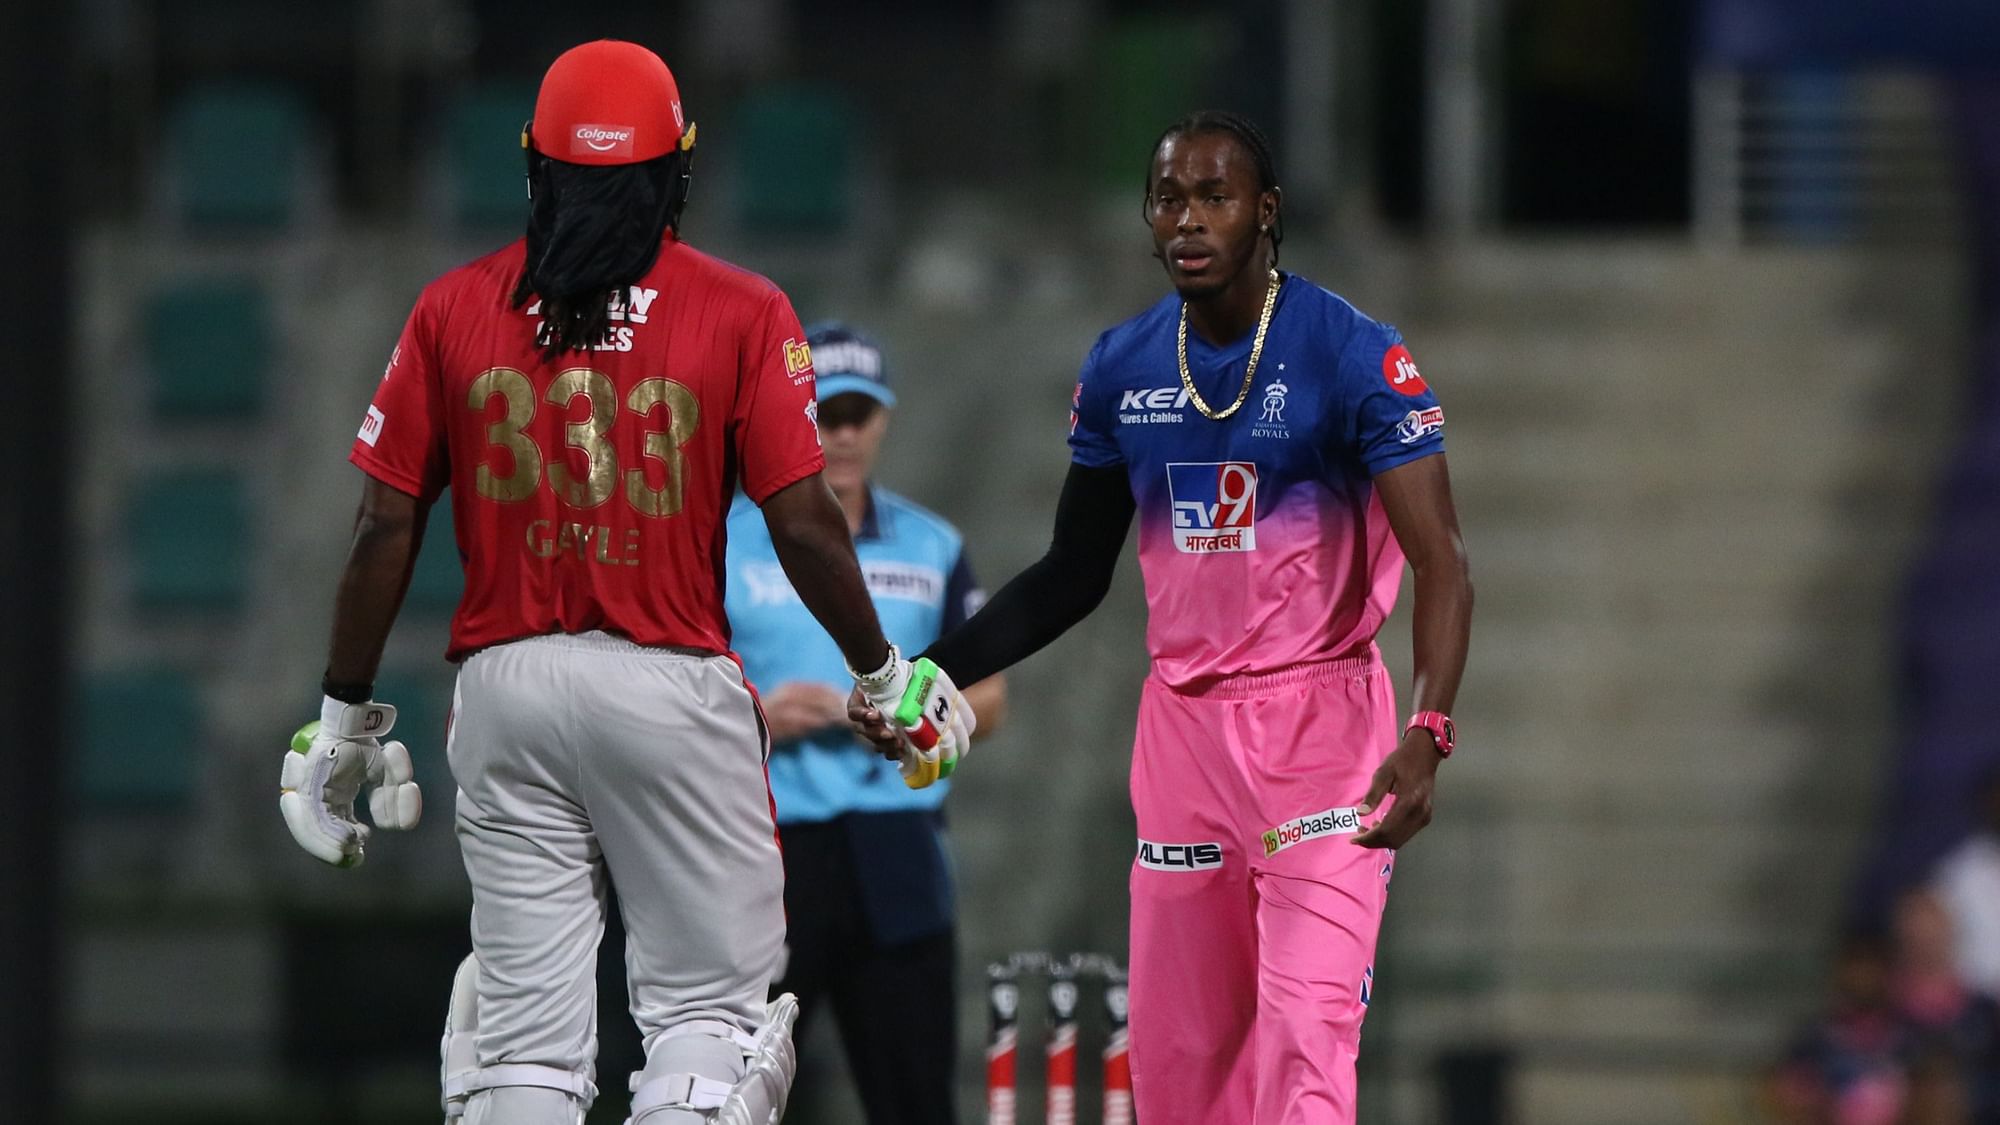 Even though Gayle missed his century, he showed sportsmanship by congratulating Archer for taking his wicket.